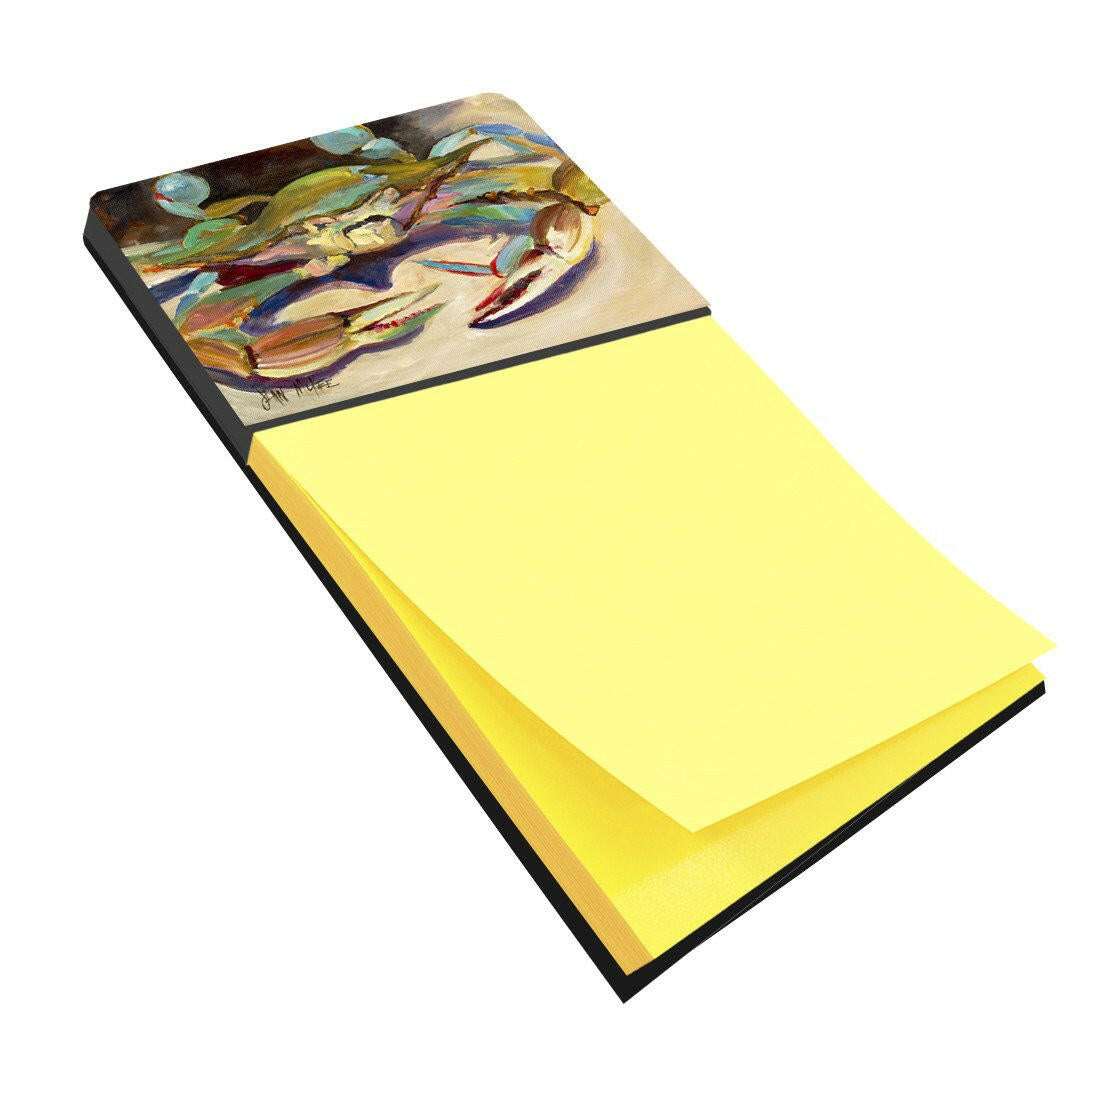 Blue Crab Tail Fin Sticky Note Holder JMK1101SN by Caroline's Treasures